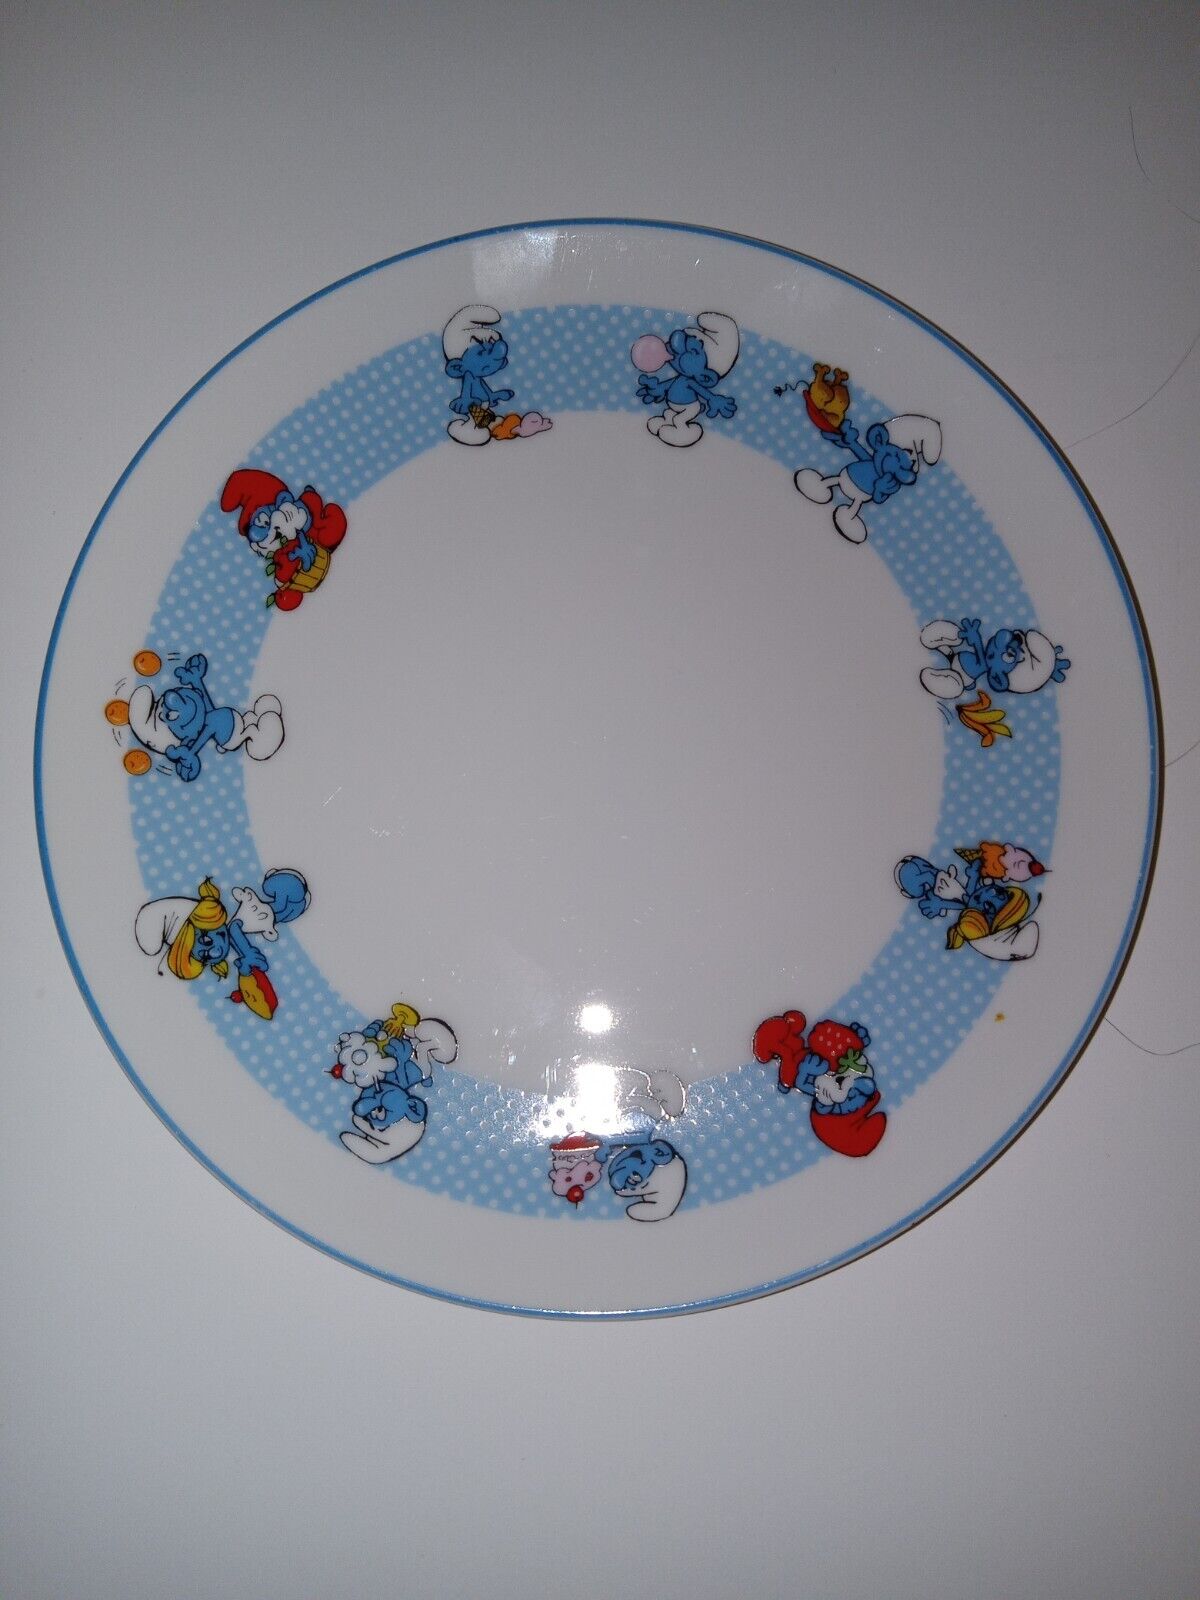 Peyo Wallace Berrie Smurfs Collectibles Plate 1982 Ceramic 8” Breakfast 